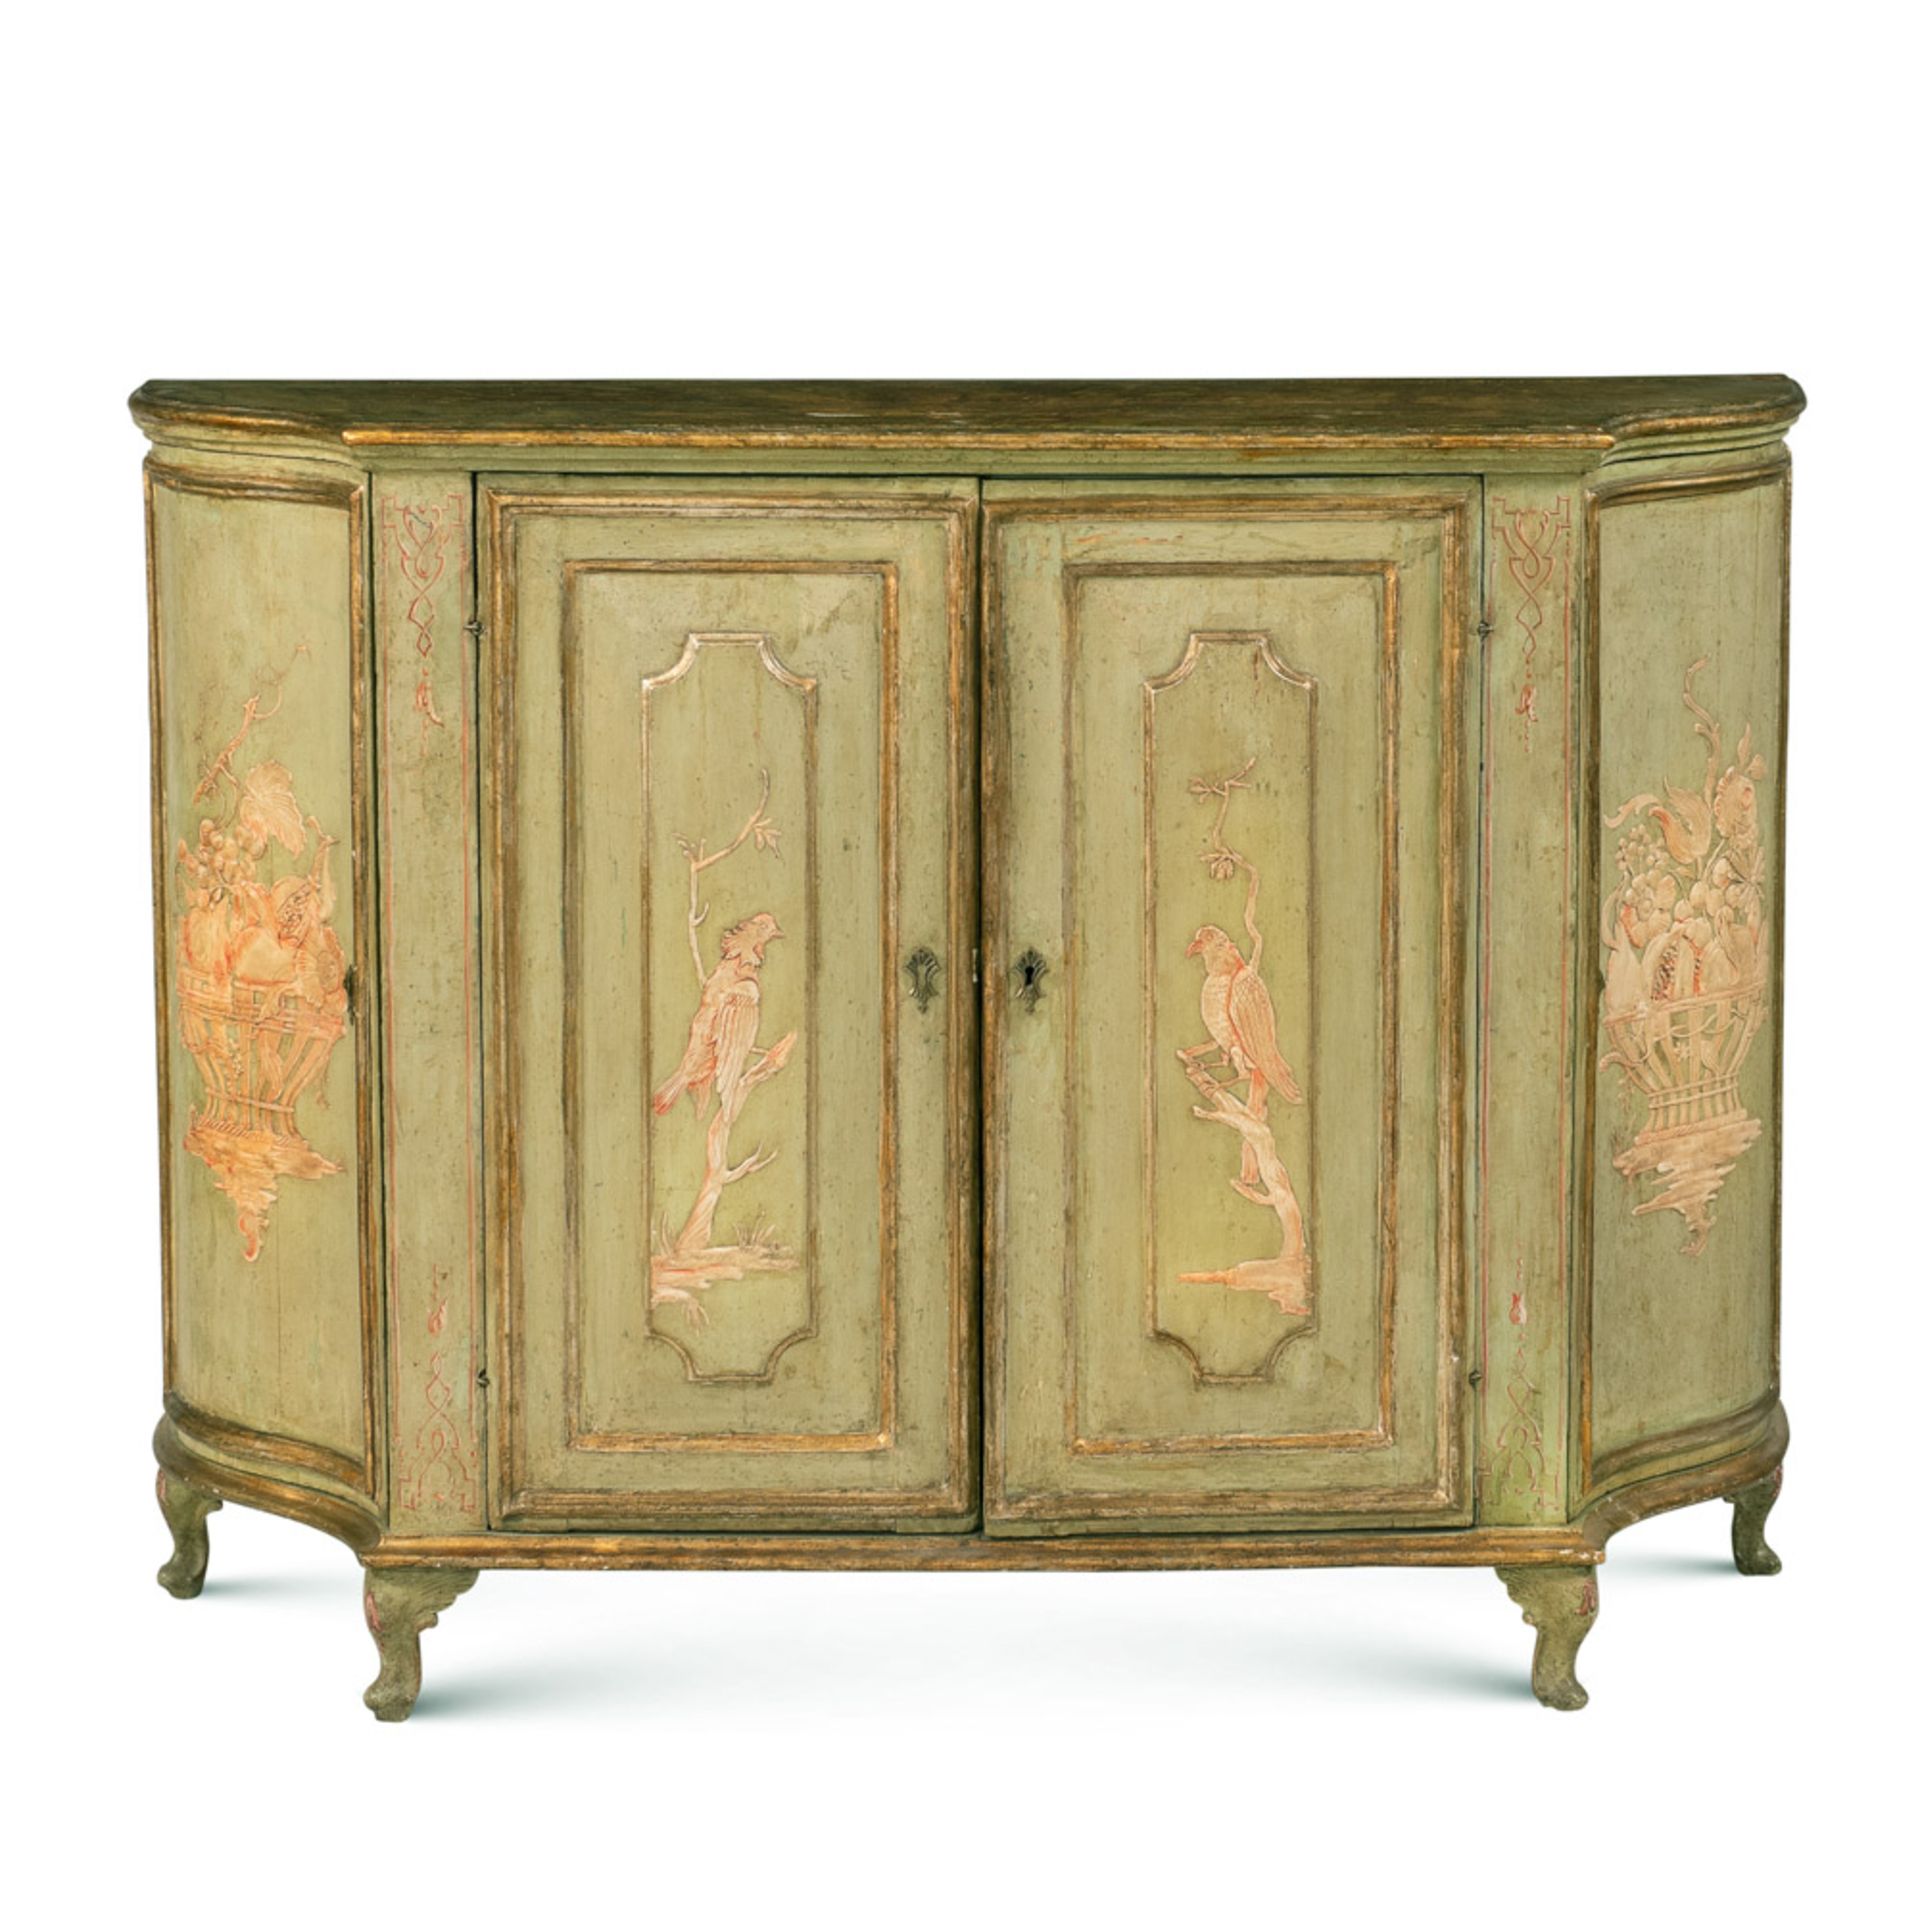 Green and gilt lacquered wood sideboard Italy, 18th-19th century 105x140x44 cm